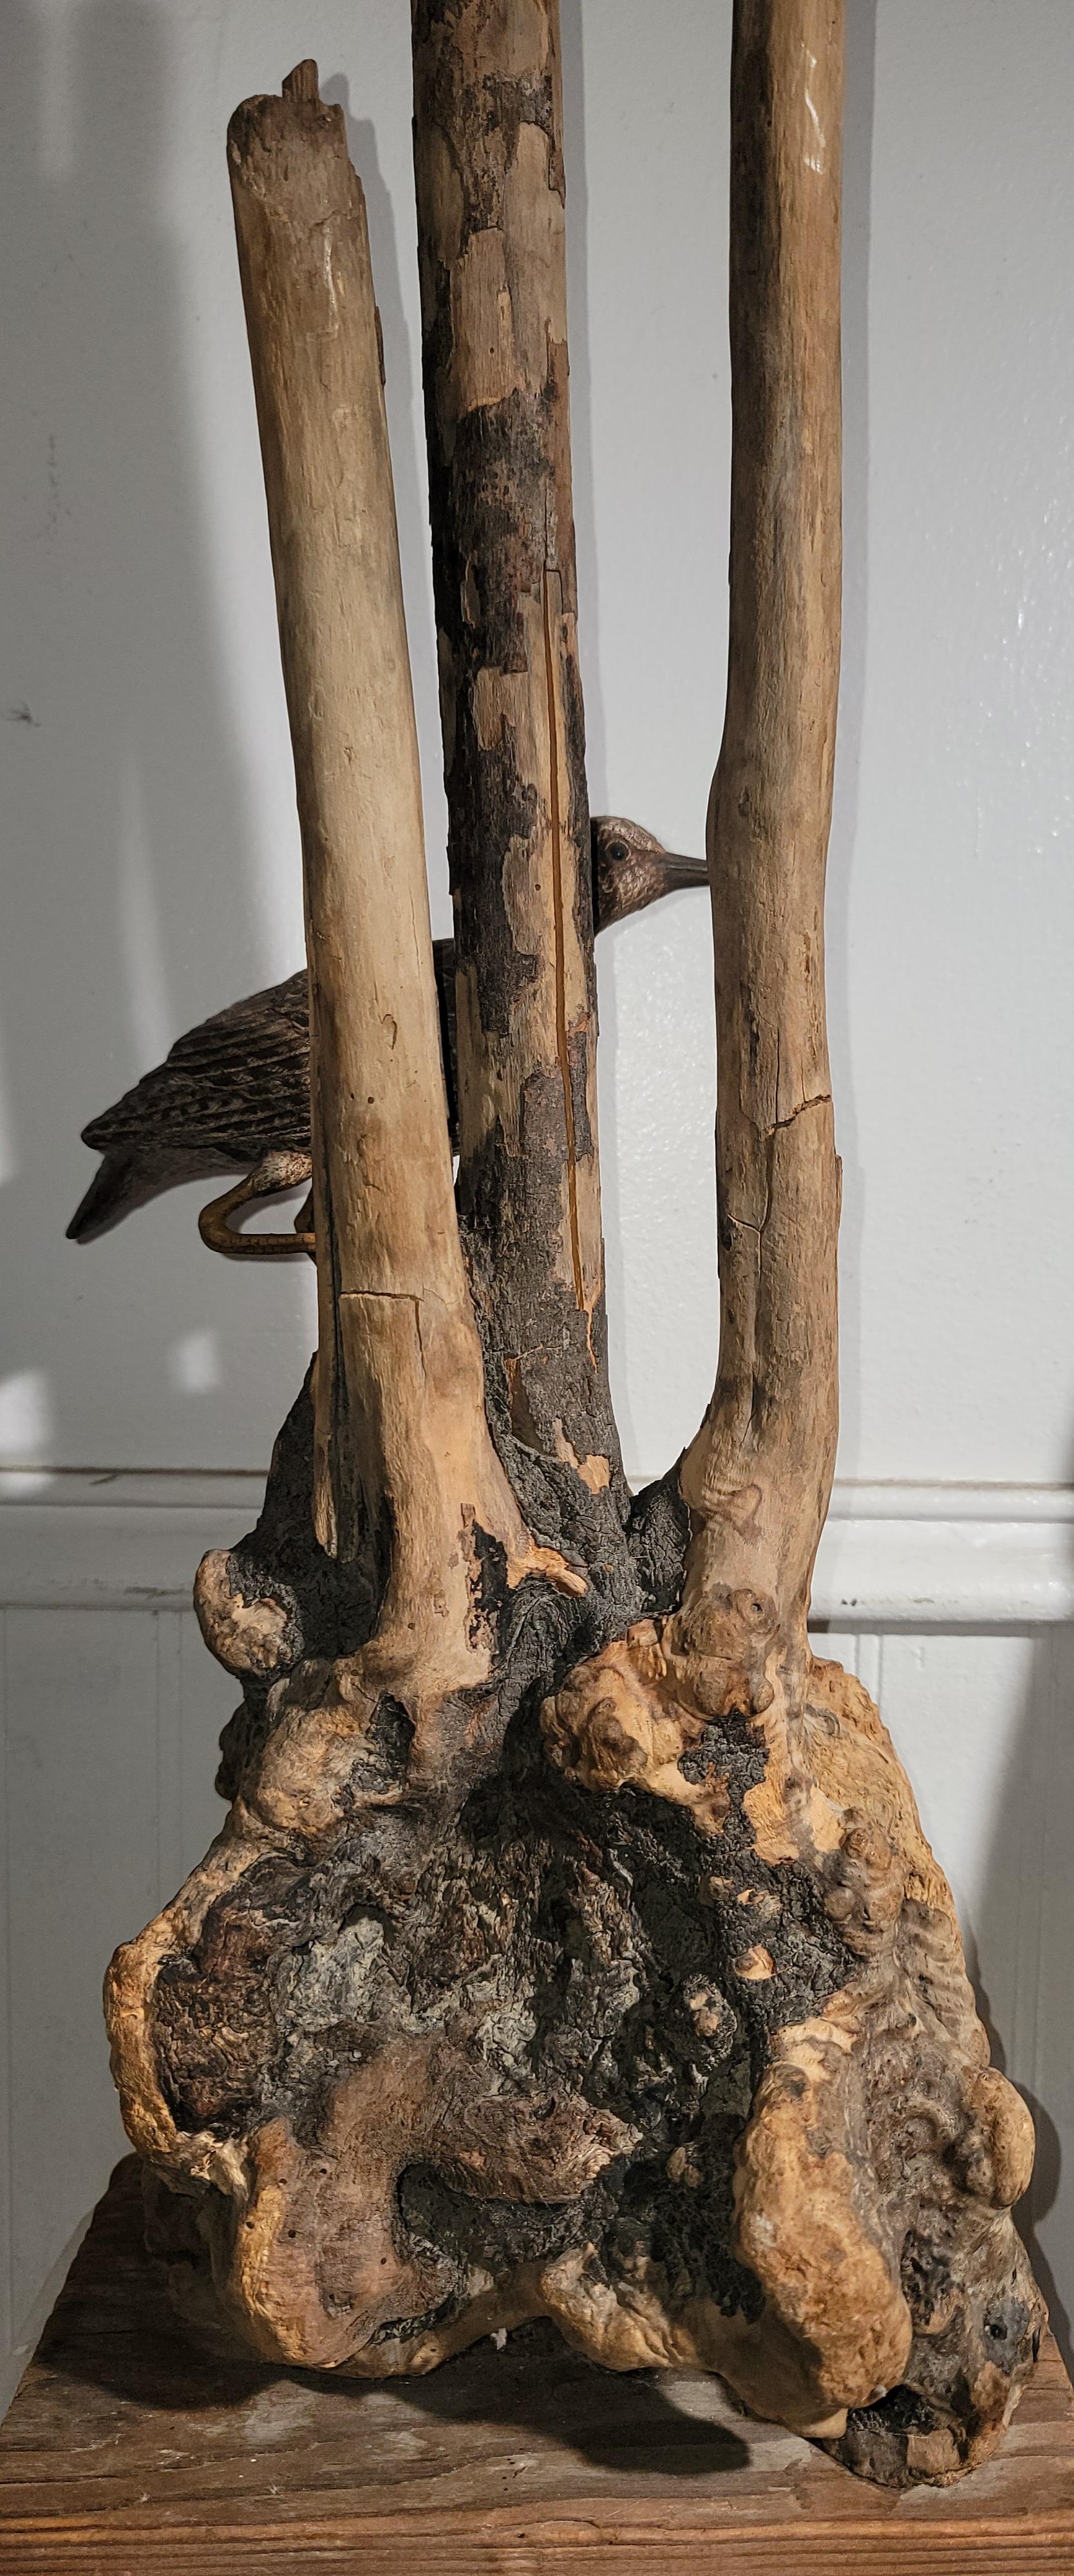 This folk art sculpture of drift wood and a plank wood base is all hand made.The bird is also wood carving added to the driftwood sculpture.The condition is very good as found condition.